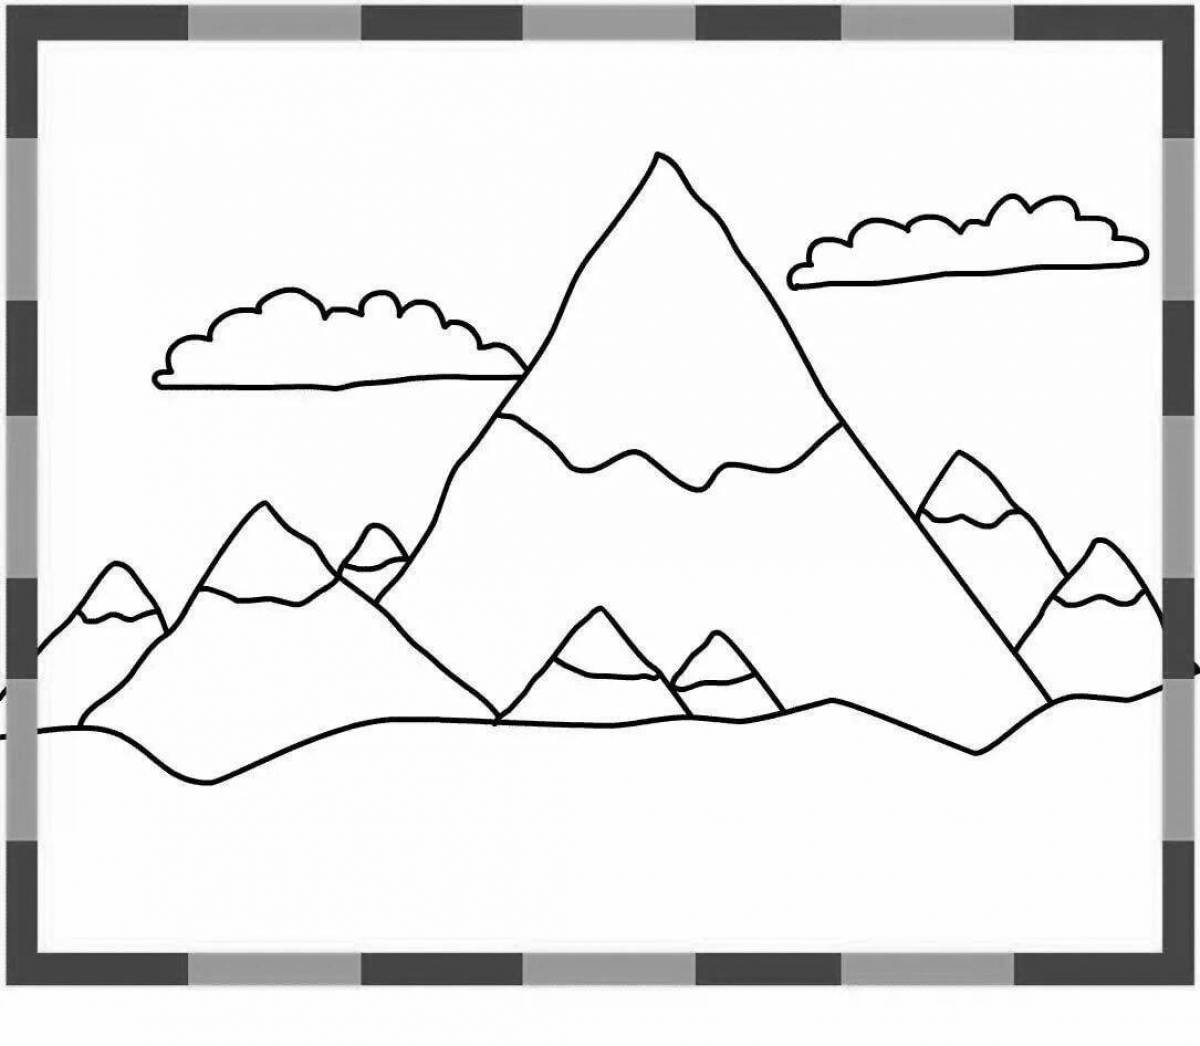 Shiny mountain coloring book for kids